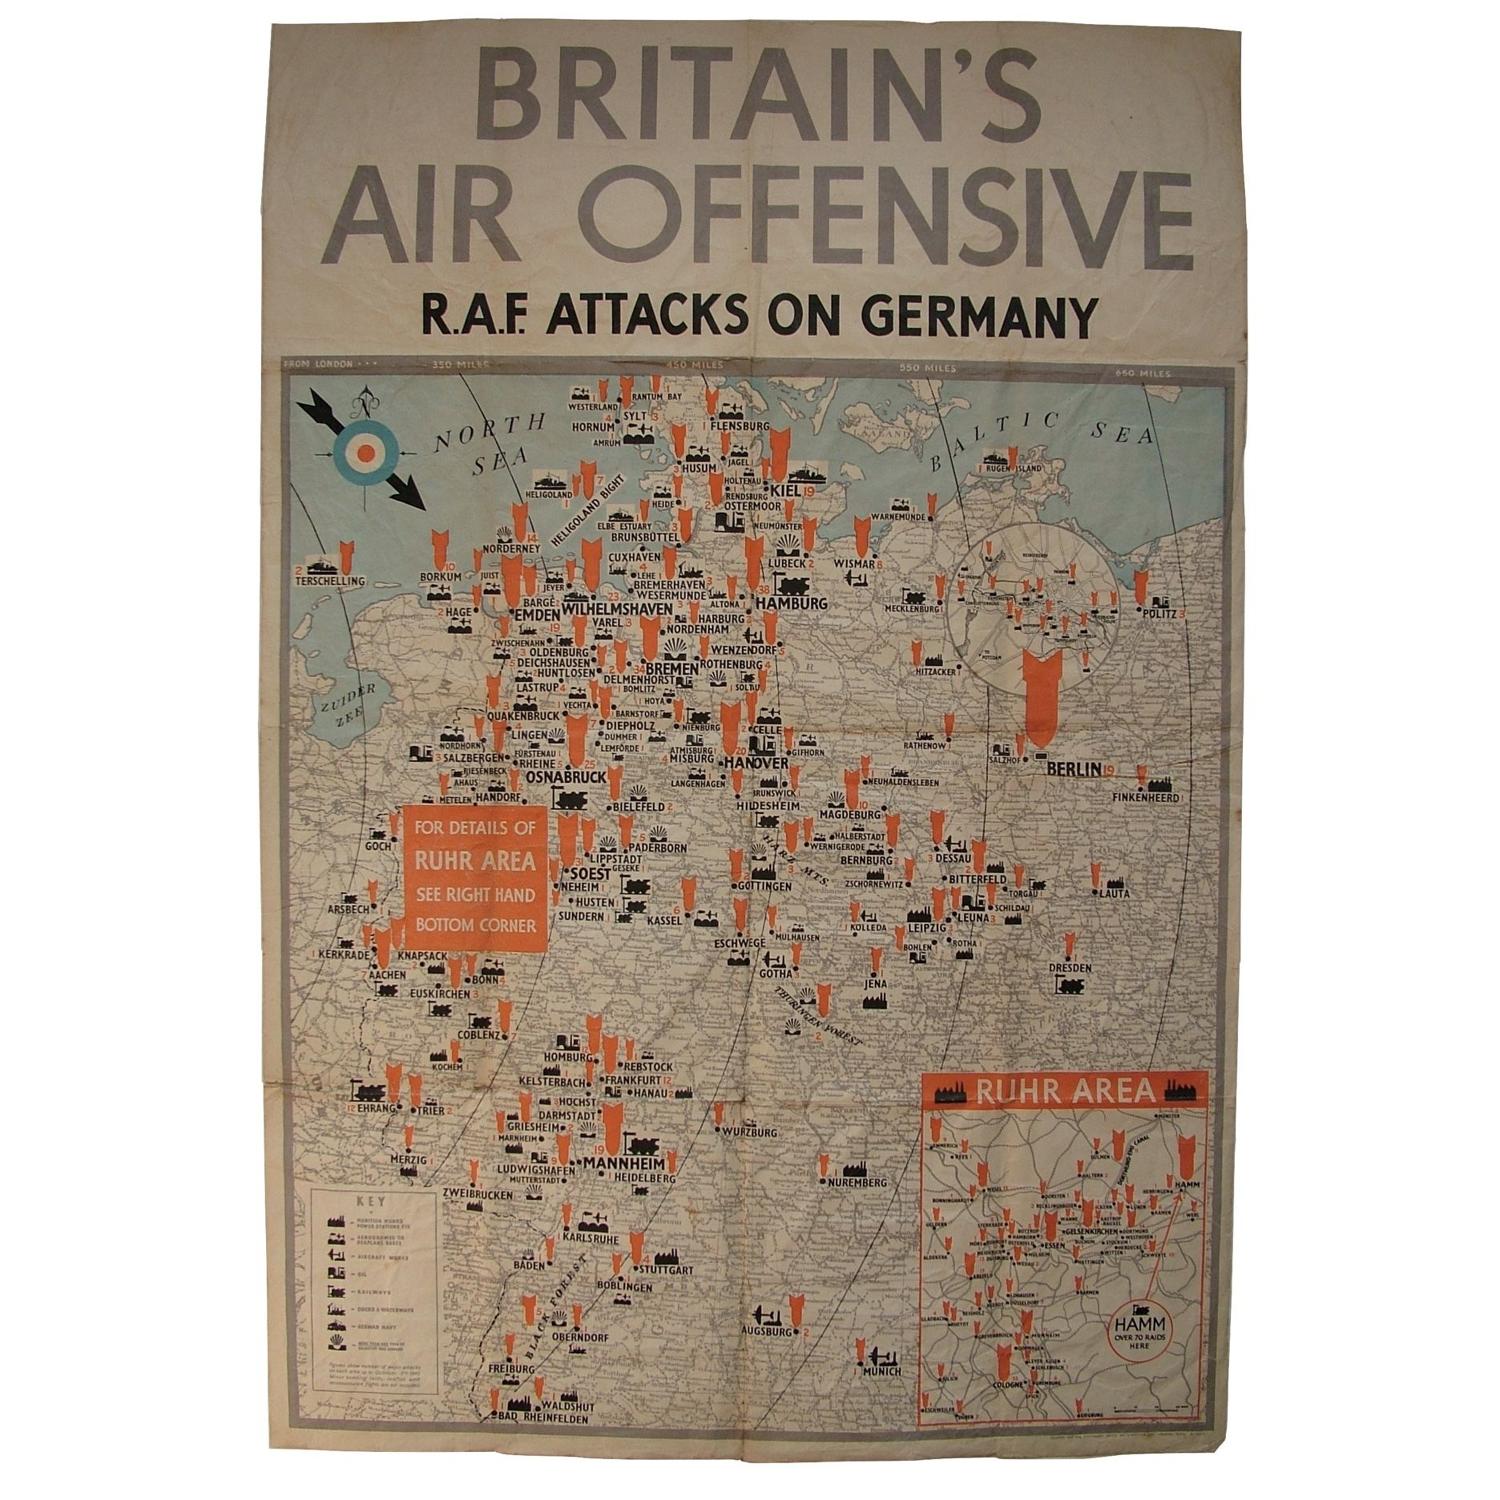 Britain's Air Offensive Poster - RAF Attacks On Germany